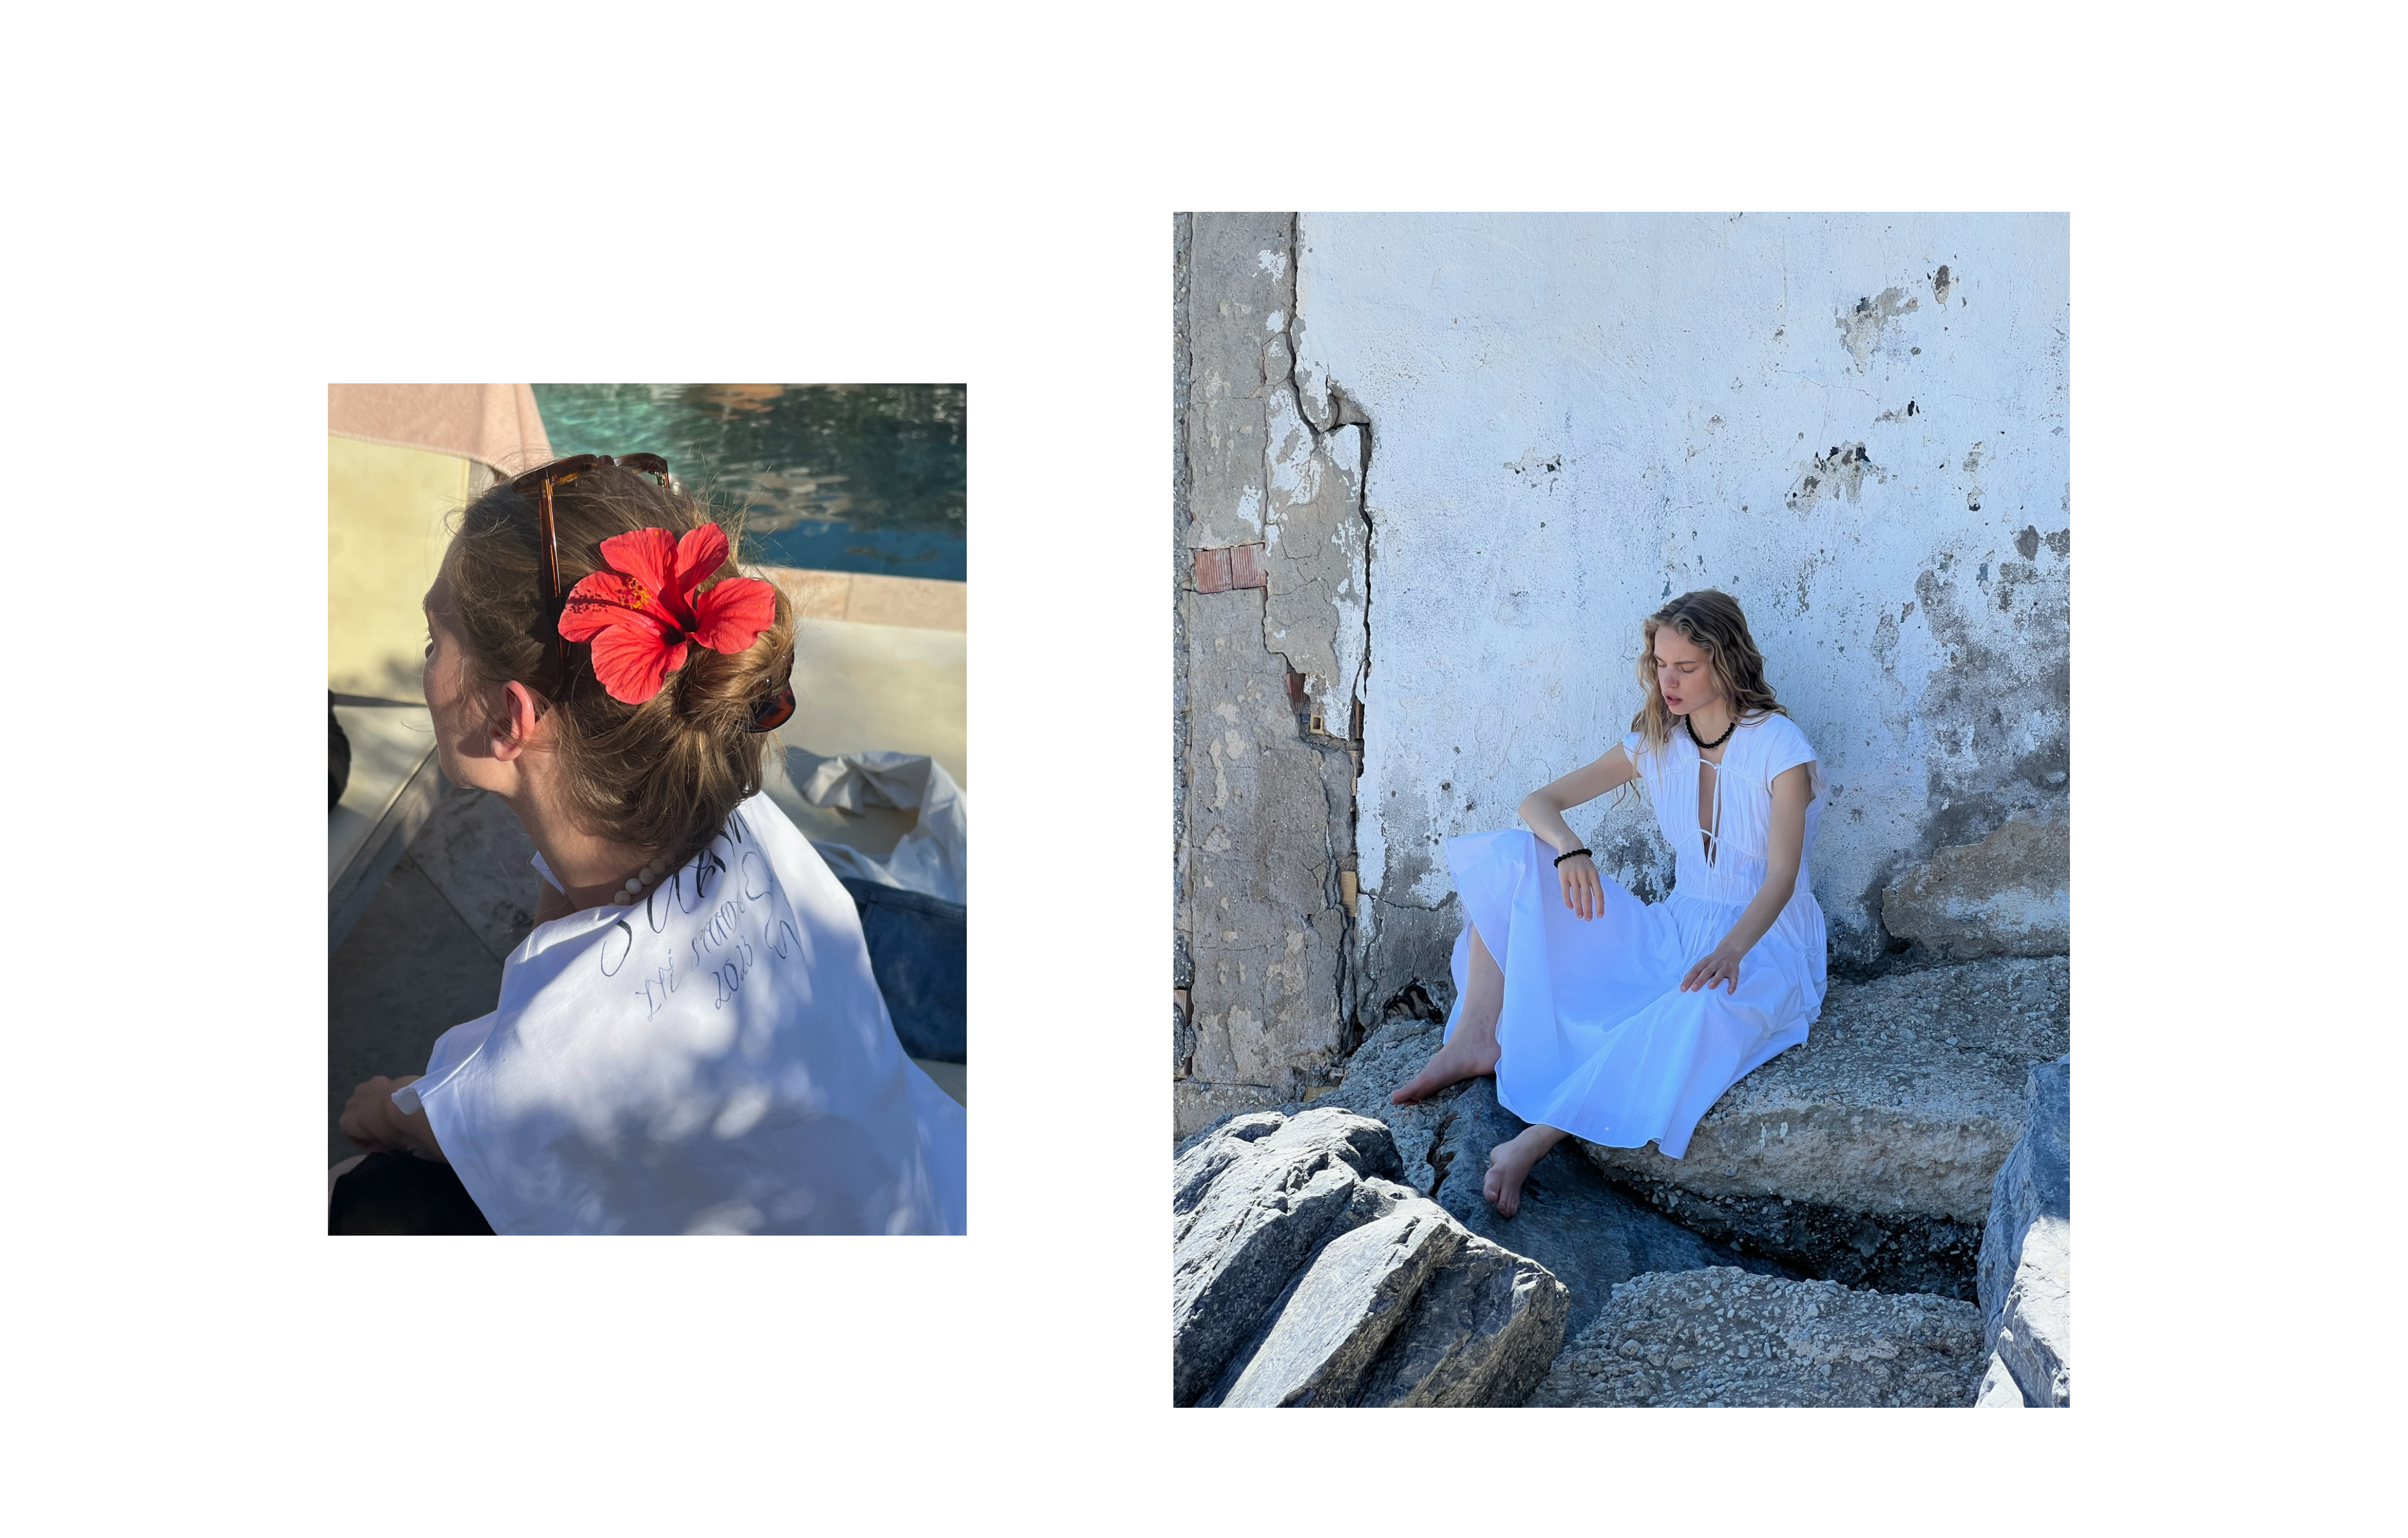 Cecilie bringing the tropical vibes with a hibiscus flower in her bun, and Sabine sitting in the shadow for a bit